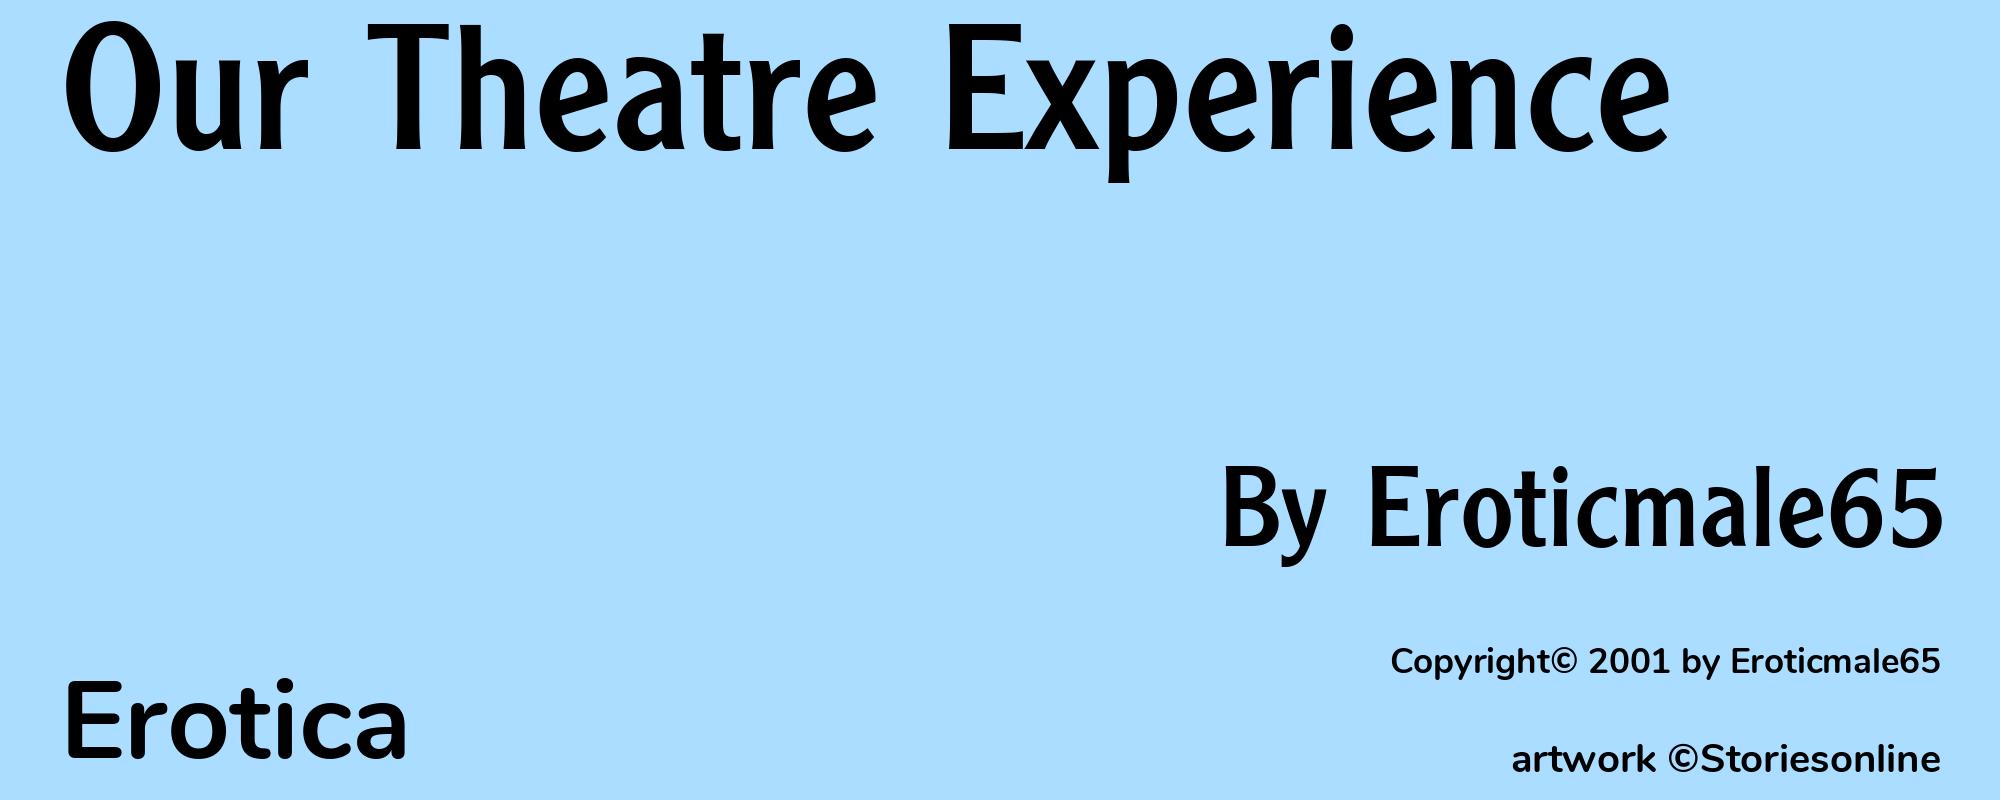 Our Theatre Experience - Cover